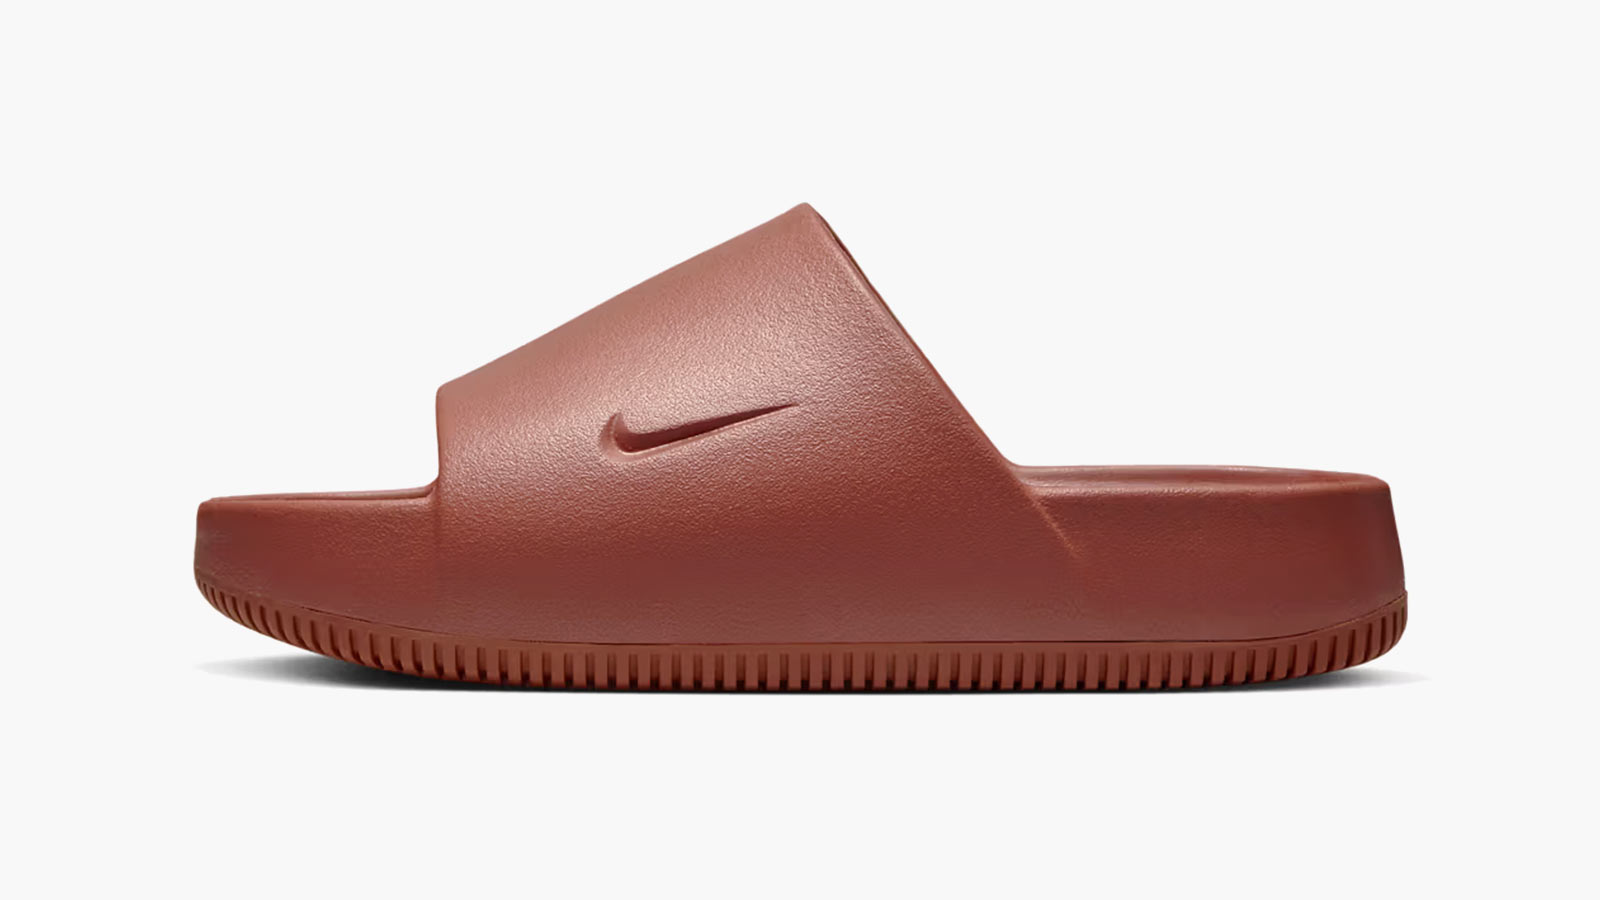 Step Into Fall In Style With Nike's Calm Slide In Rugged Orange - IMBOLDN